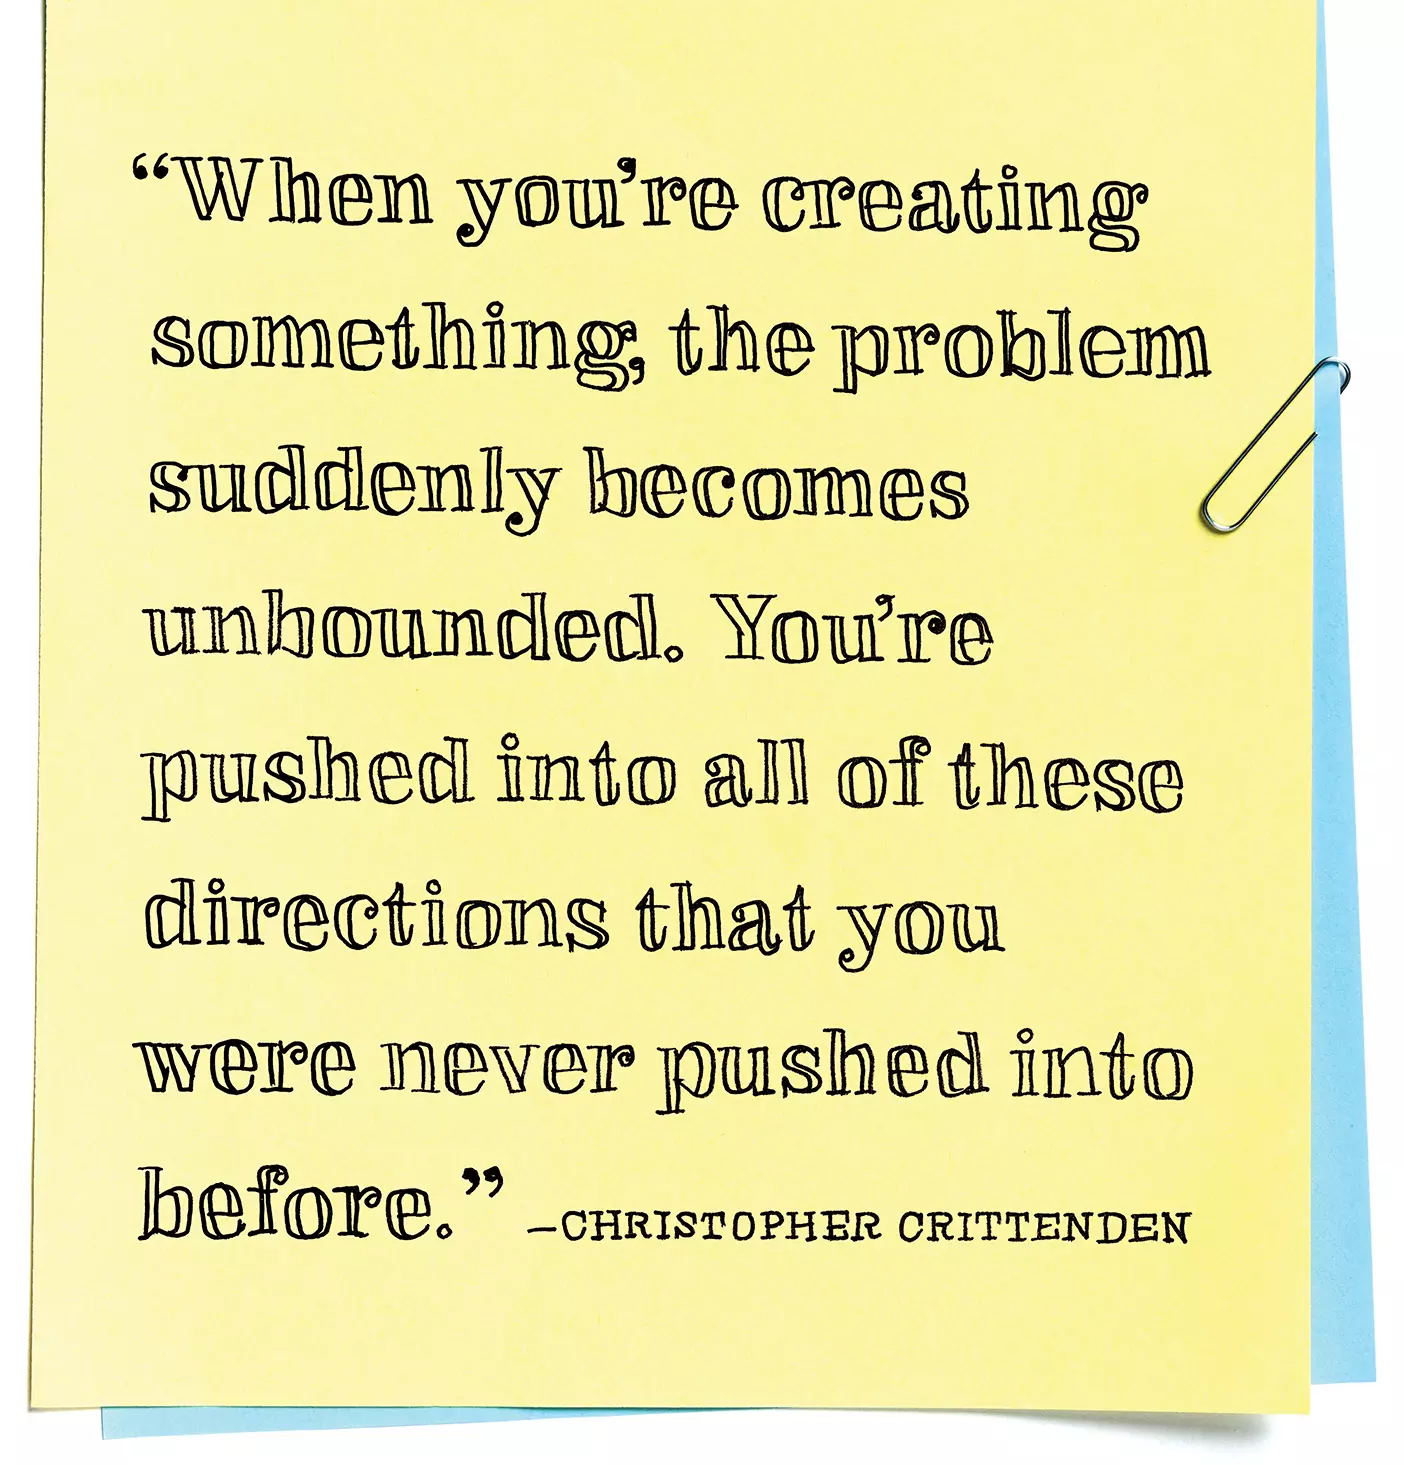 "When you’re creating something, the problem suddenly becomes unbounded. You’re pushed into all of these directions that you were never pushed into before.”